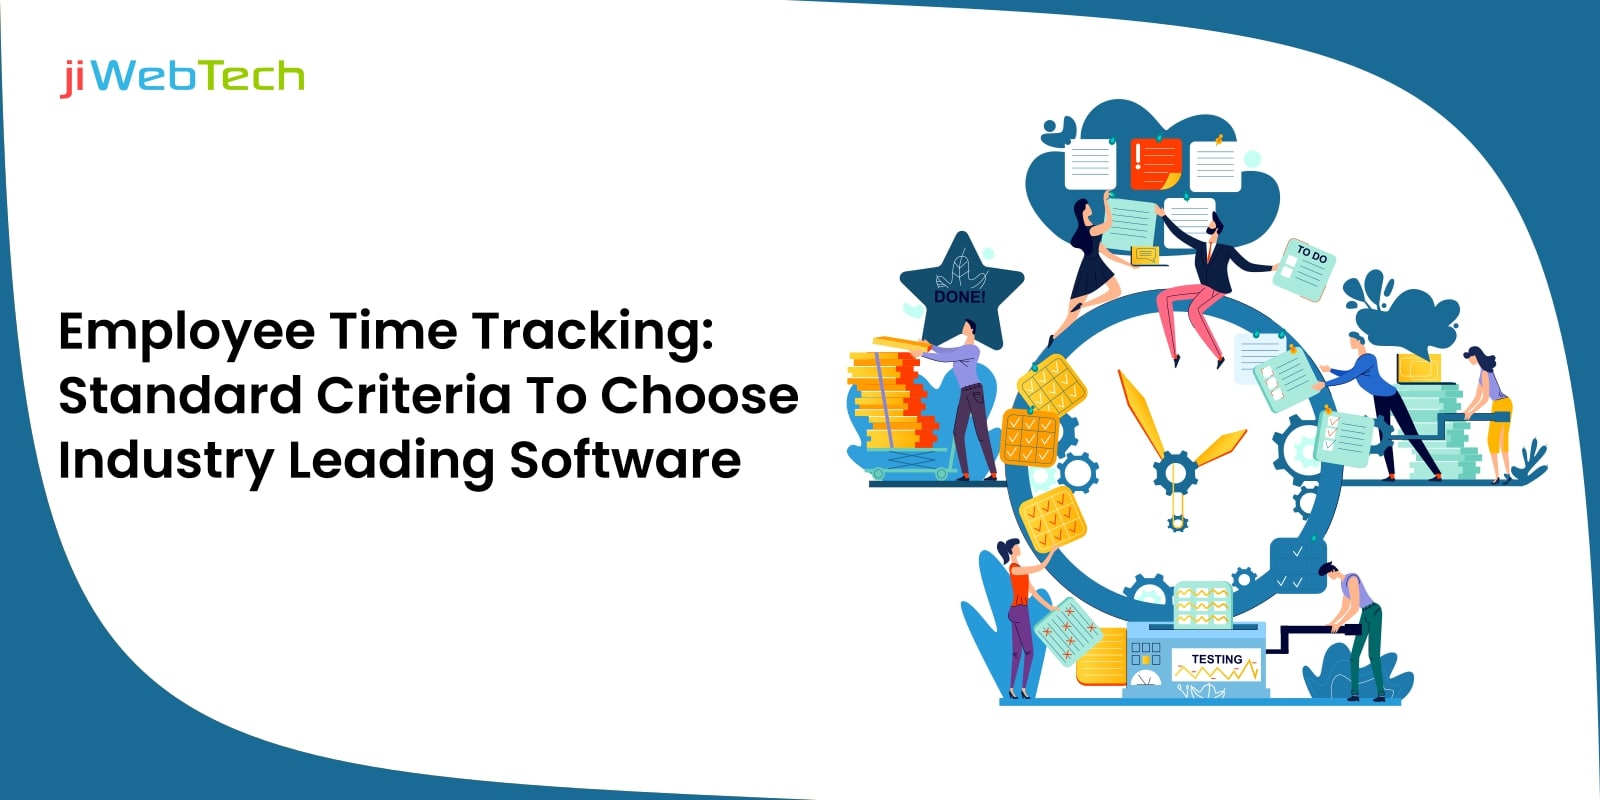 Employee Time Tracking: Standard Criteria To Choose Industry Leading Software